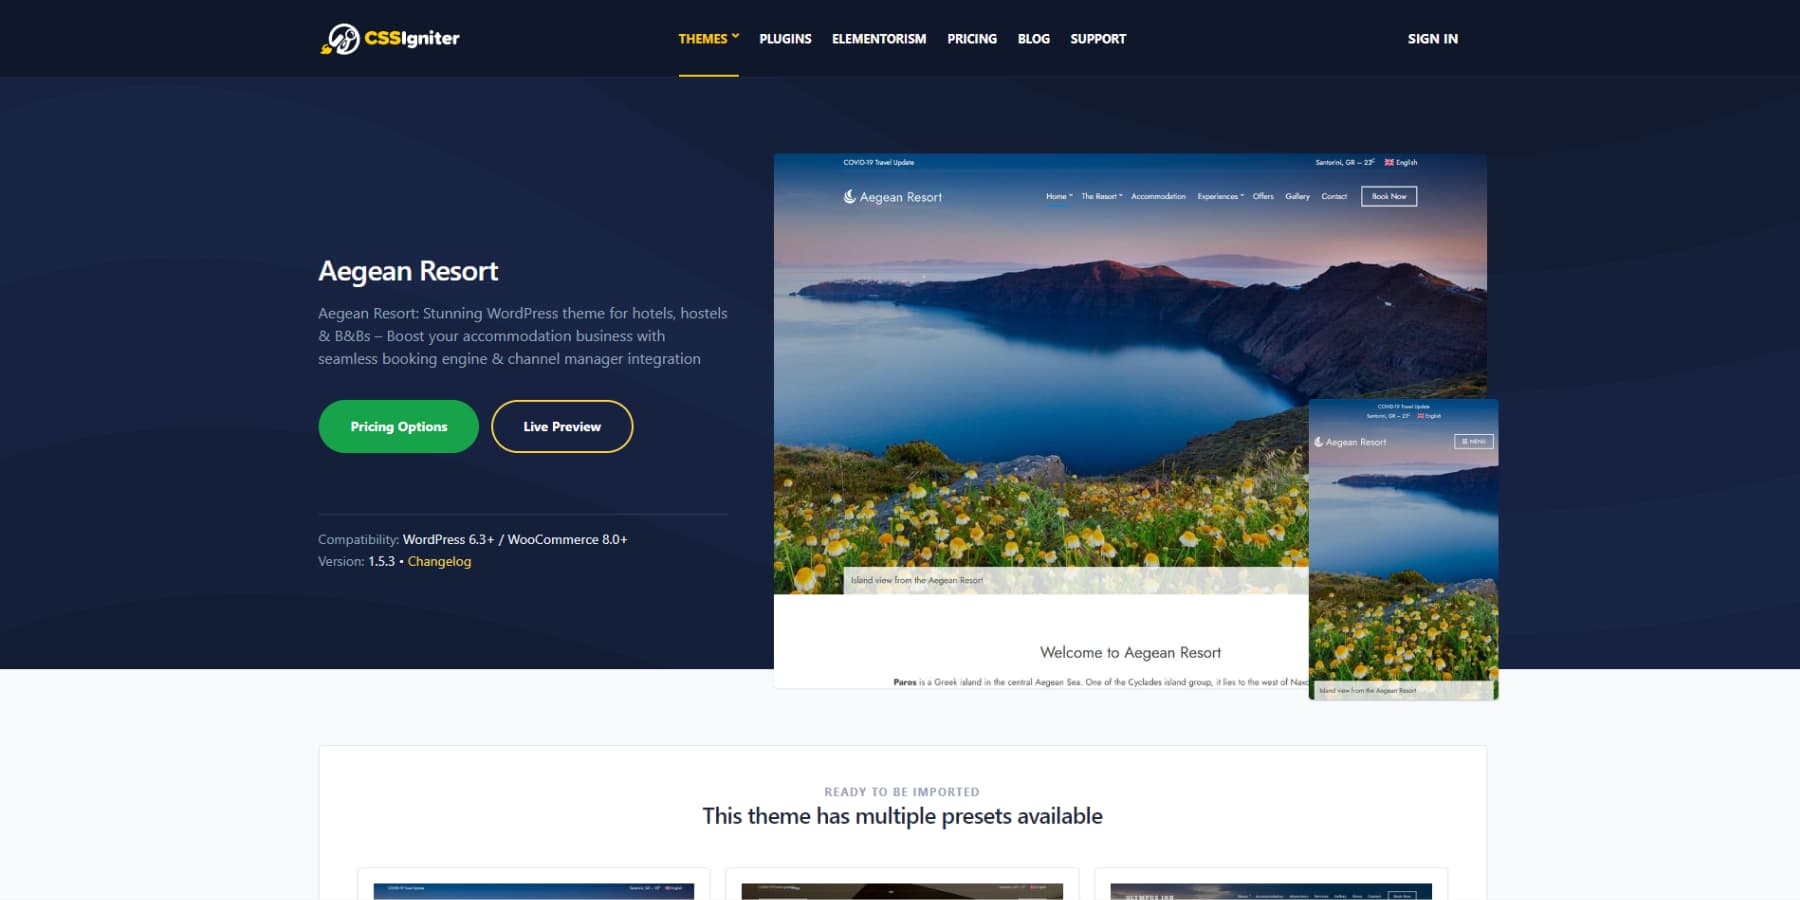 A screenshot of Aegean Resort's home page